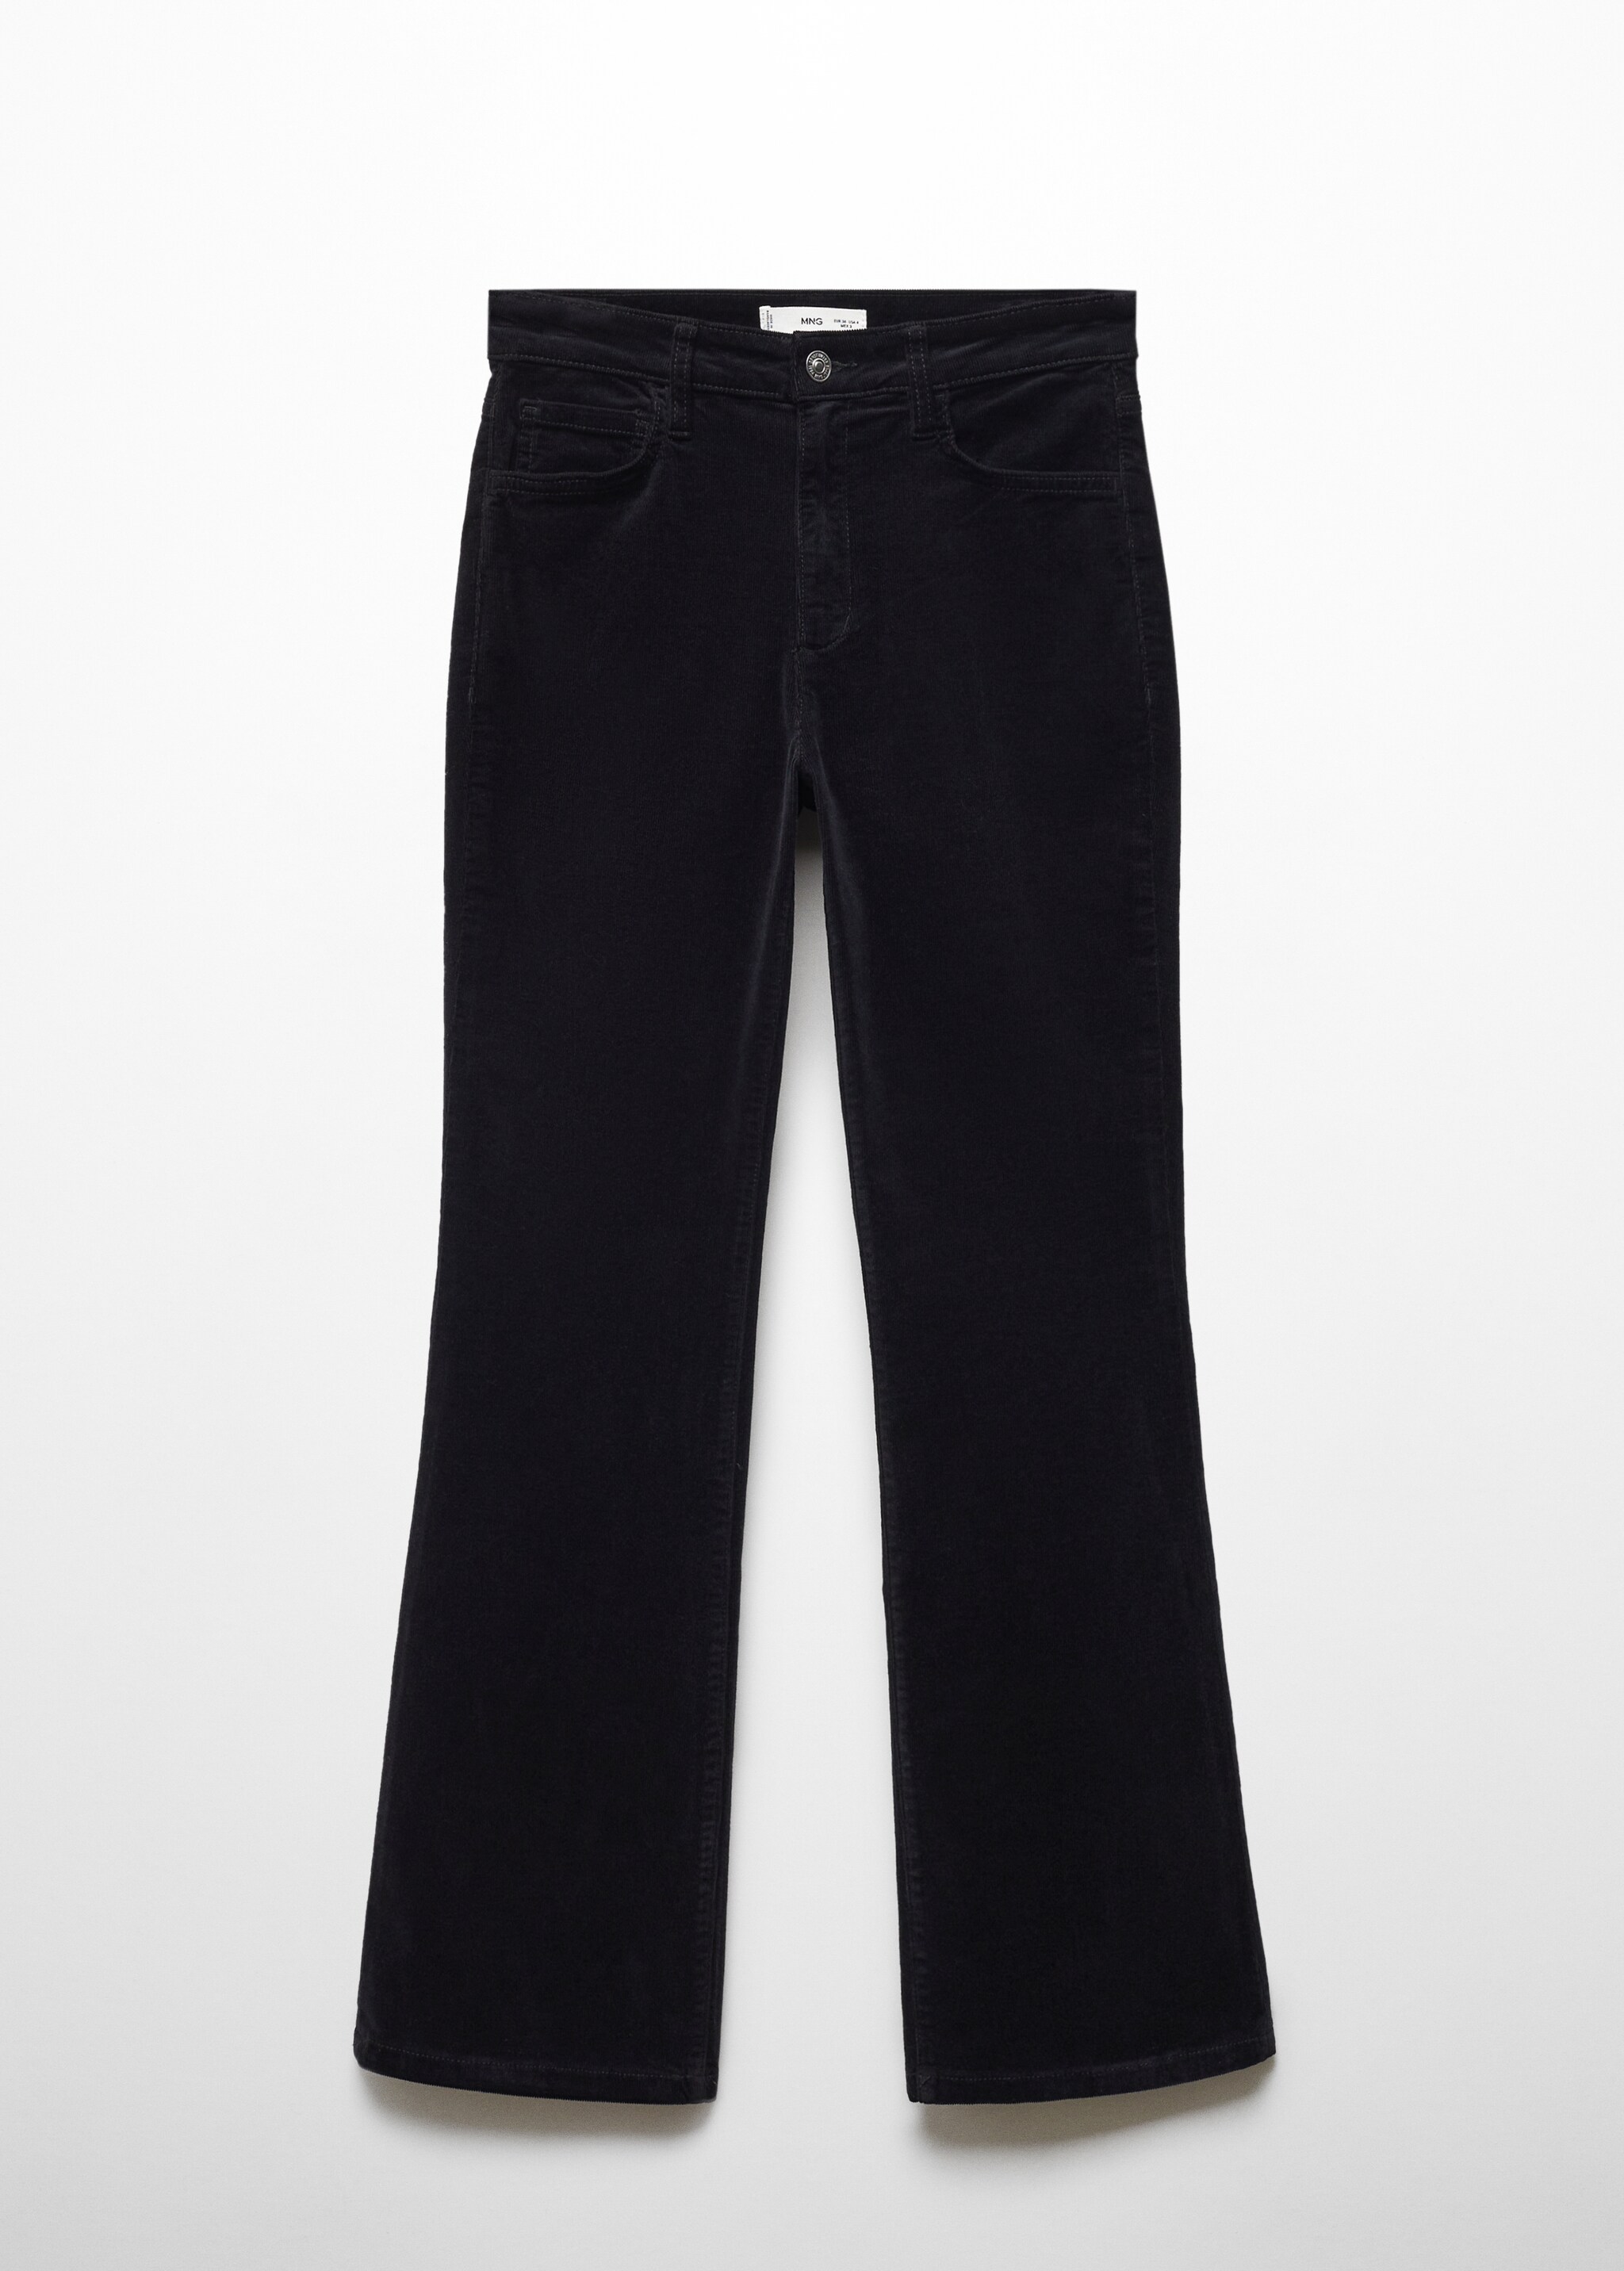 Flare crop corduroy pants - Article without model